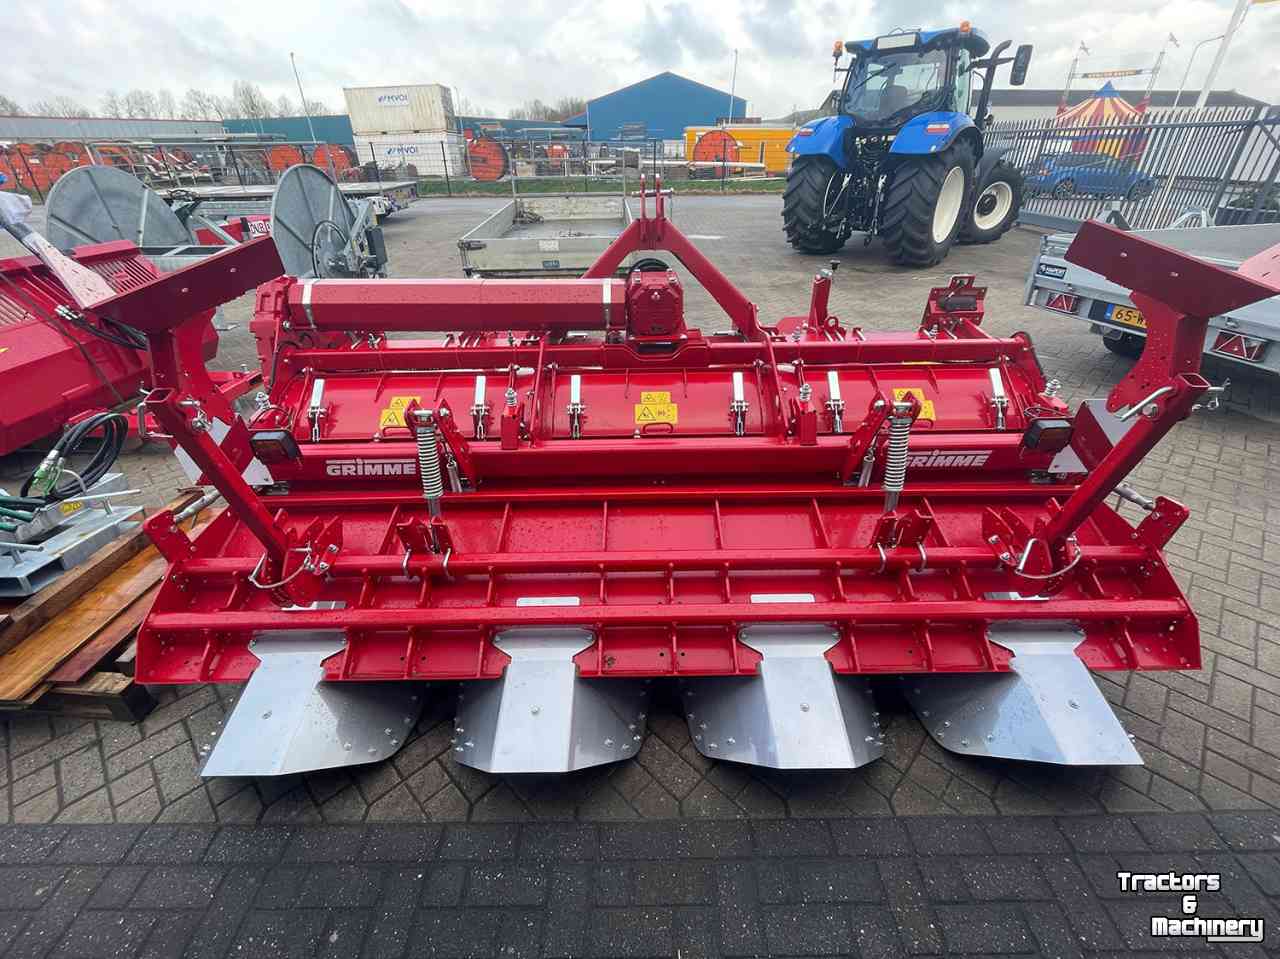 Rotary Hiller Grimme GF400